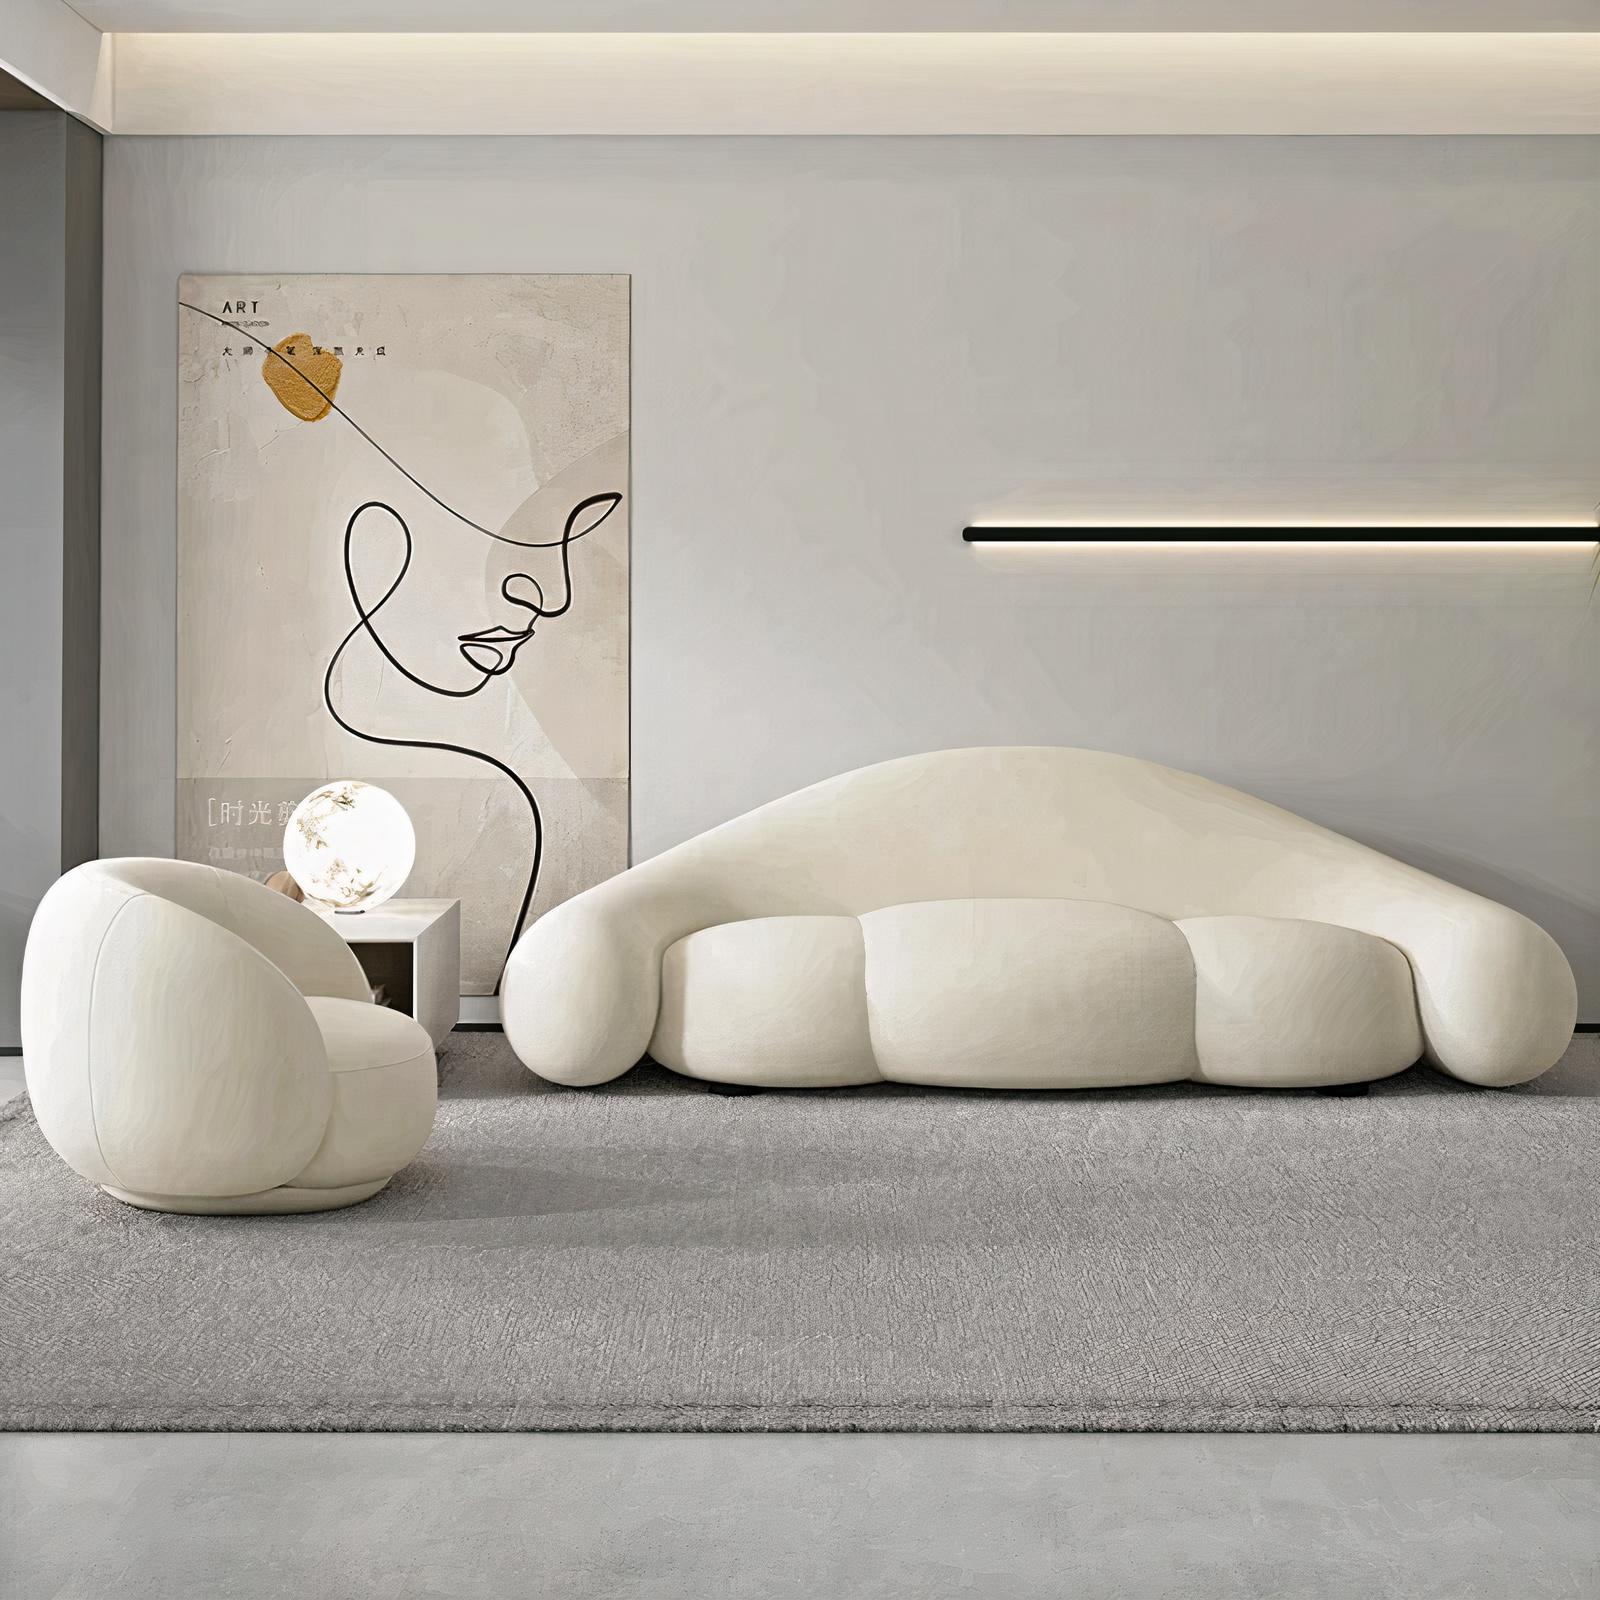 Introducing the Cloud Sofa - the ultimate comfort haven that will transform your living space into a cozy oasis of relaxation. With its plush, cloud-like texture and luxurious feel, this sofa is designed to make you feel like you're floating on a